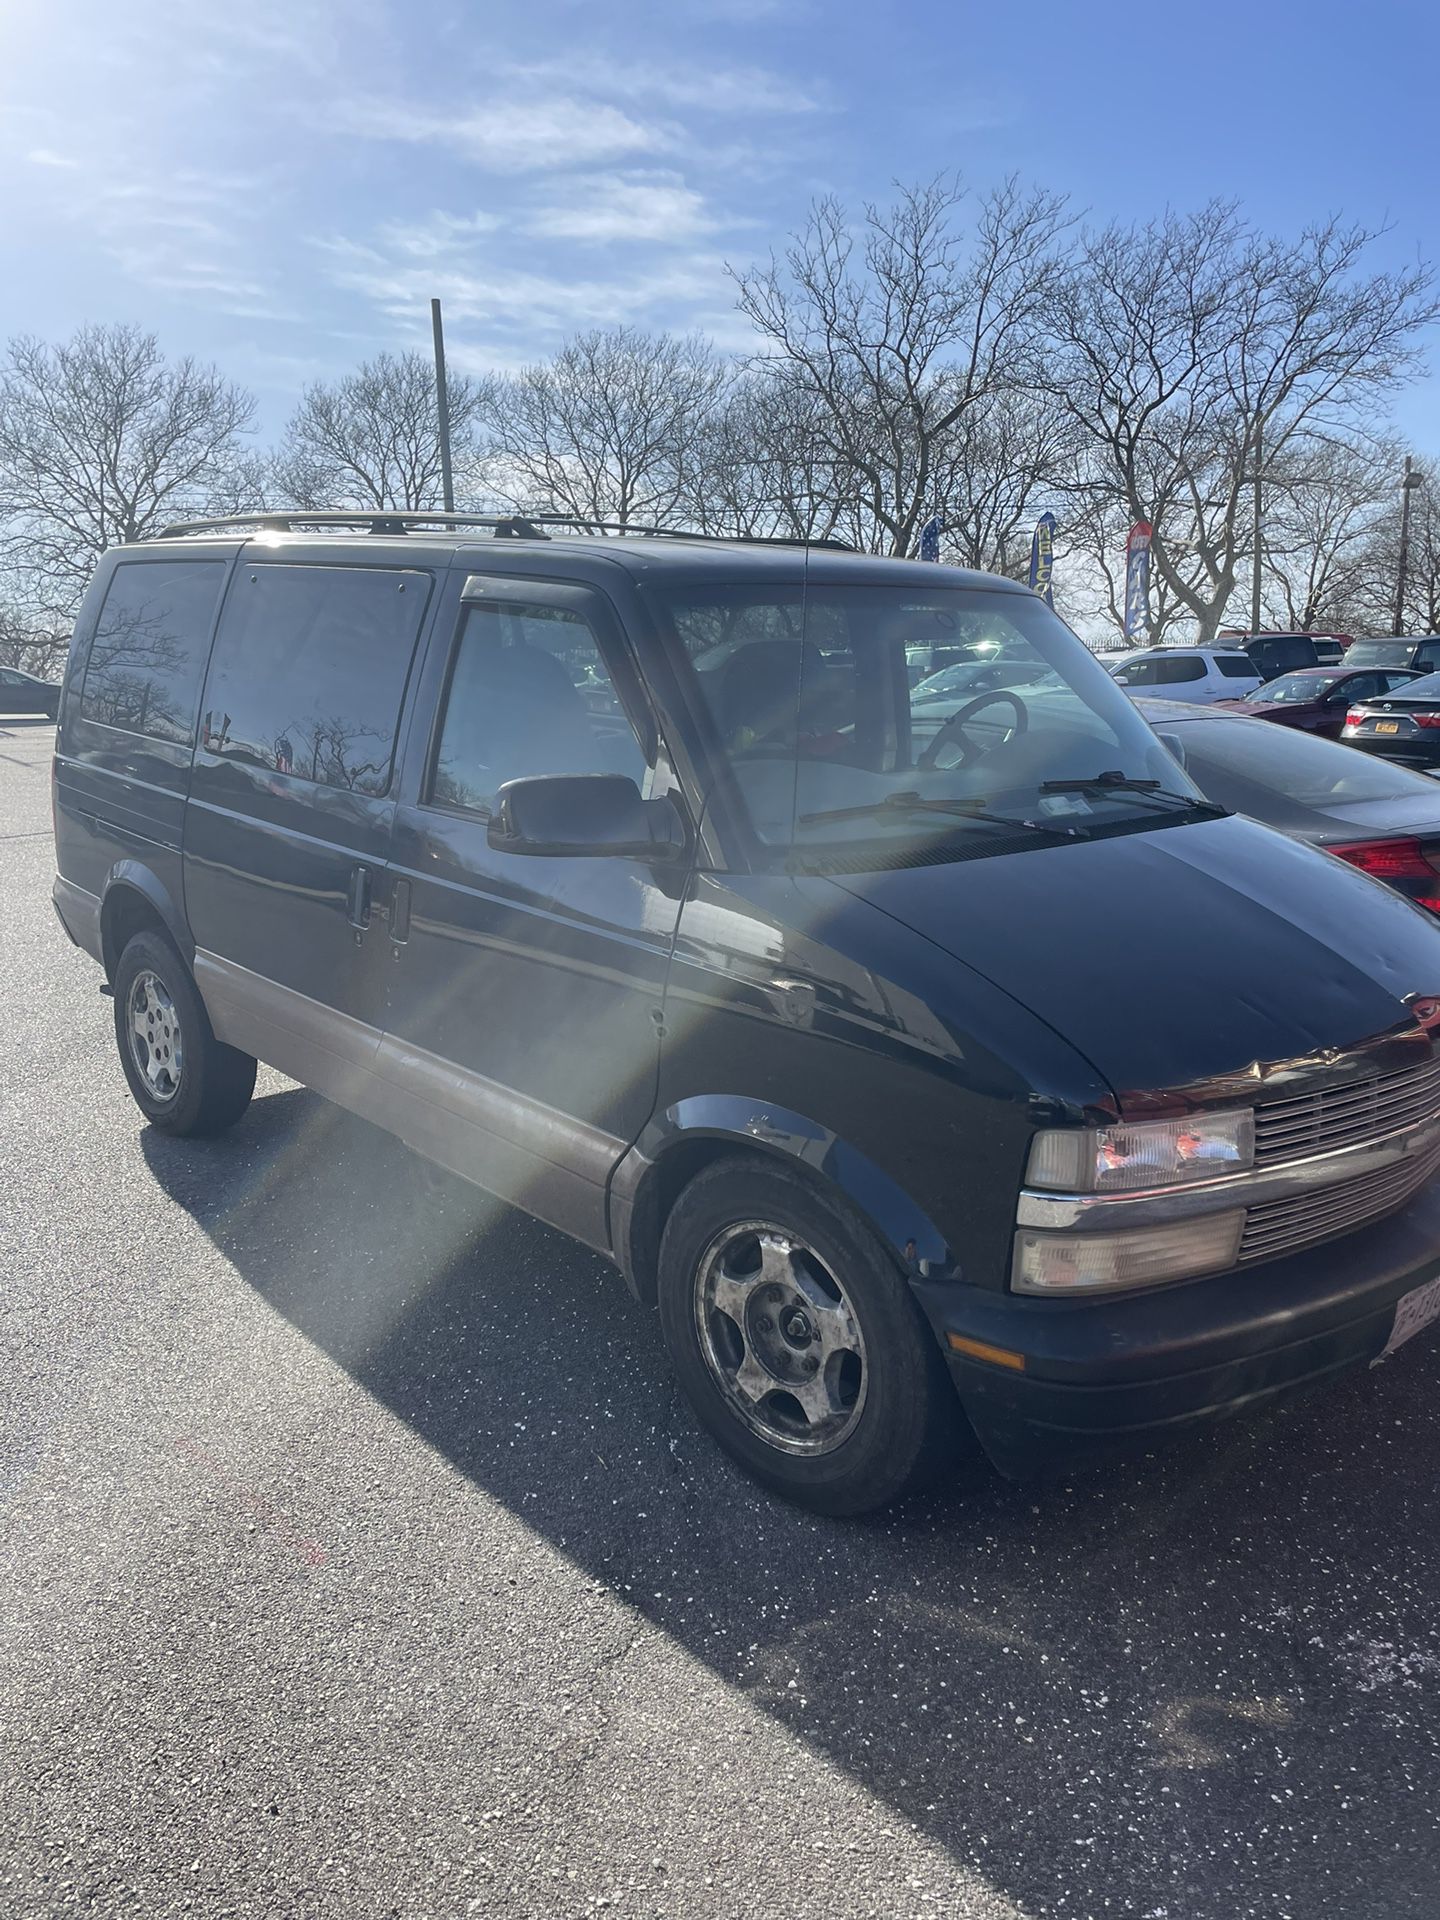 2004 Chevrolet Astro for Sale in Brooklyn, NY - OfferUp